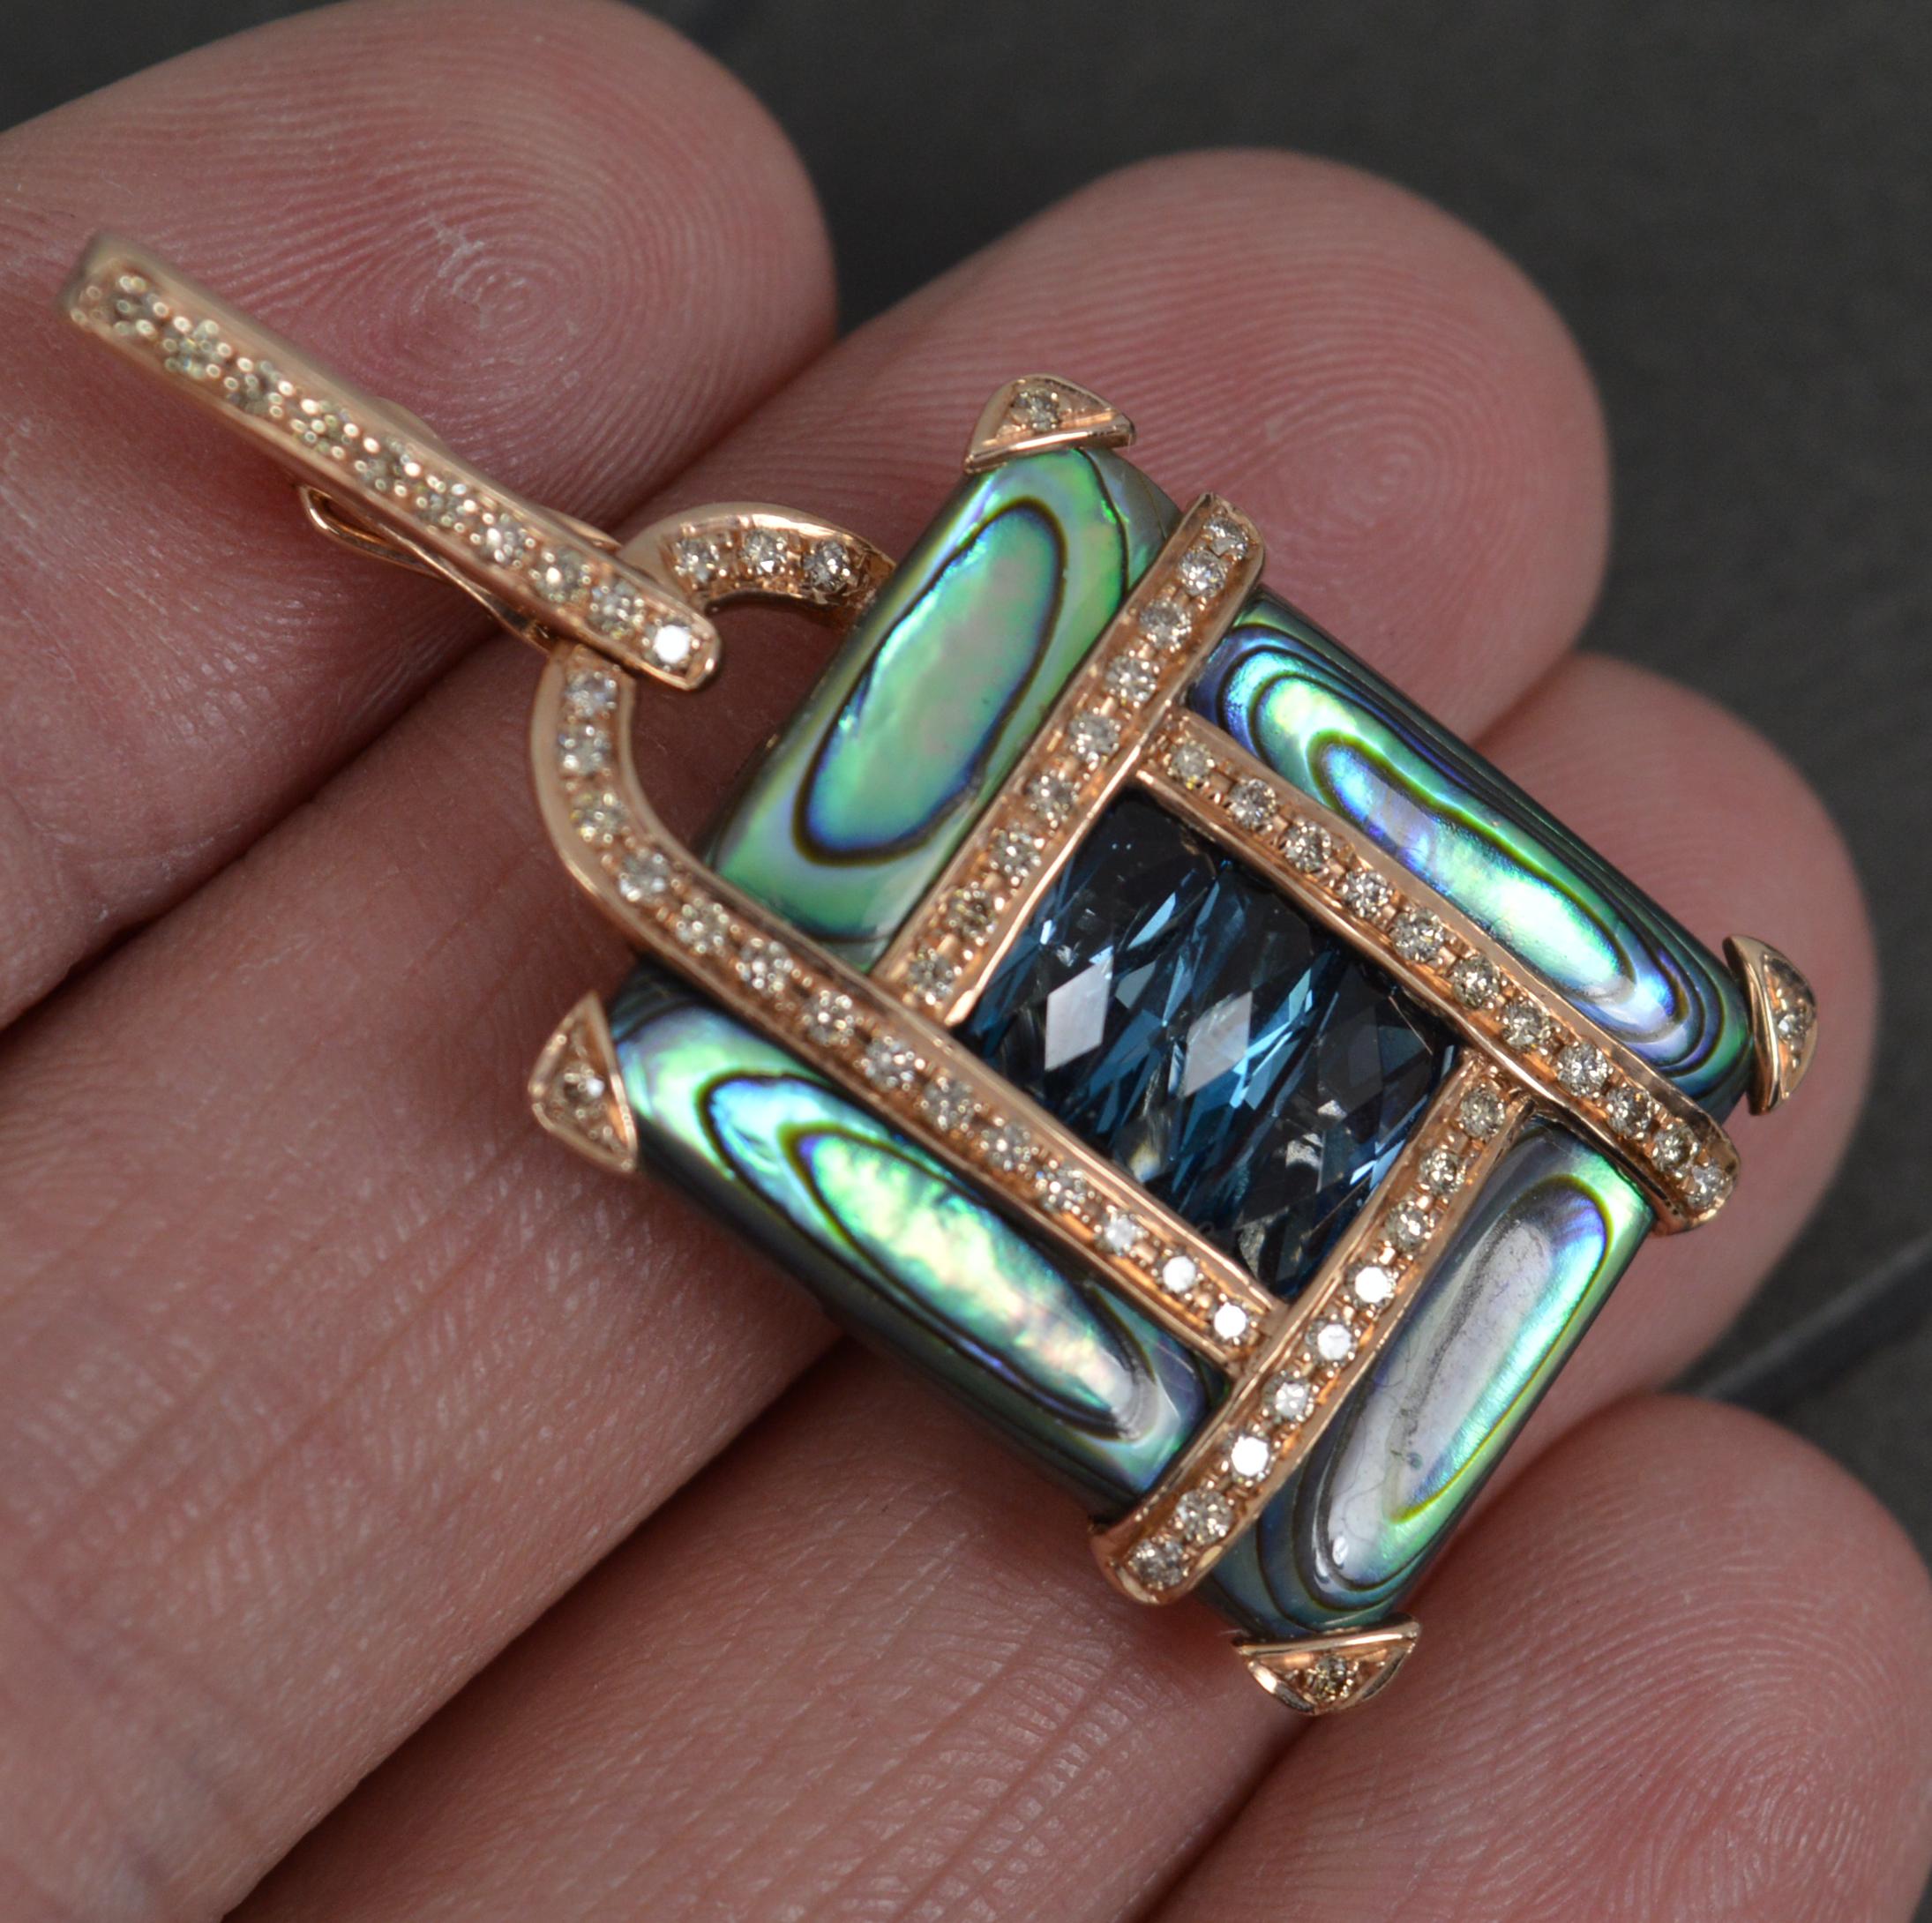 A superb designer pendant by Bellarri.
Solid 14 carat rose gold piece.
Designed with three facet cut rectangular shaped topaz stones to centre. Four abalone shell panels surrounding and all gold sections pave set with round brilliant cut